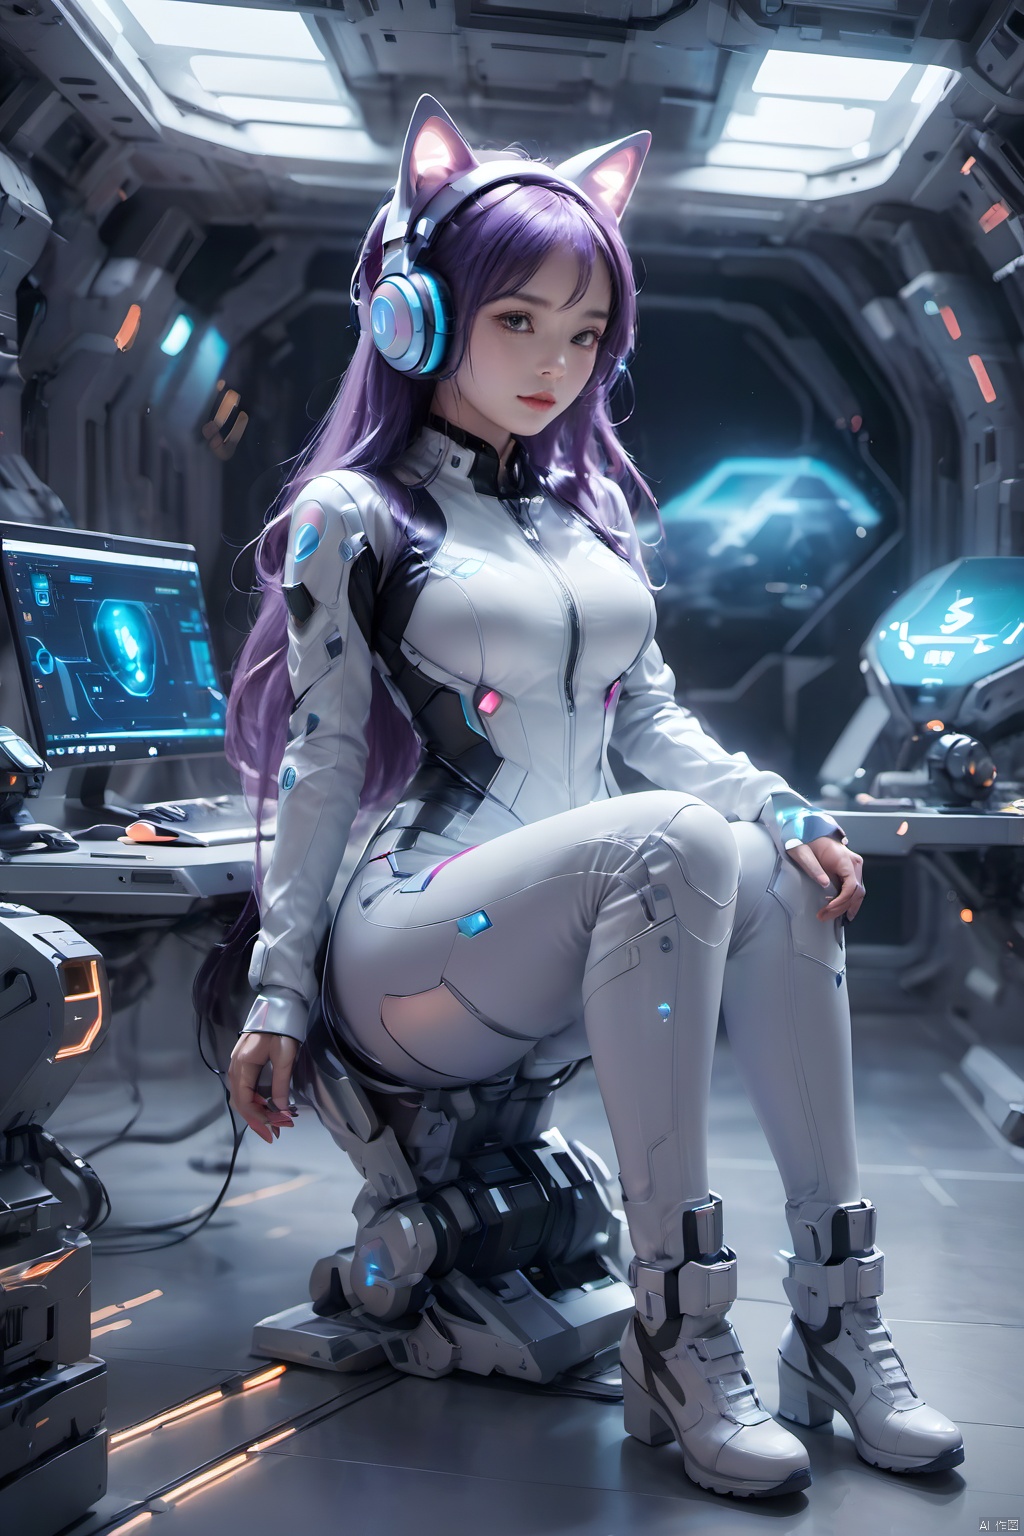 1girl,Future style gel coat,Future Combat Suit,animal ears,bodysuit,breasts,cat ear headphones,computer,hand on headphones,Glowing Clothing,Future Technology Space Station,full body,Sitting posture,Clothing with multiple light sources,headphones,headset,laptop,long hair,looking at viewer,motor vehicle,robot ears,science fiction,sitting,solo,Purple hair, glow,